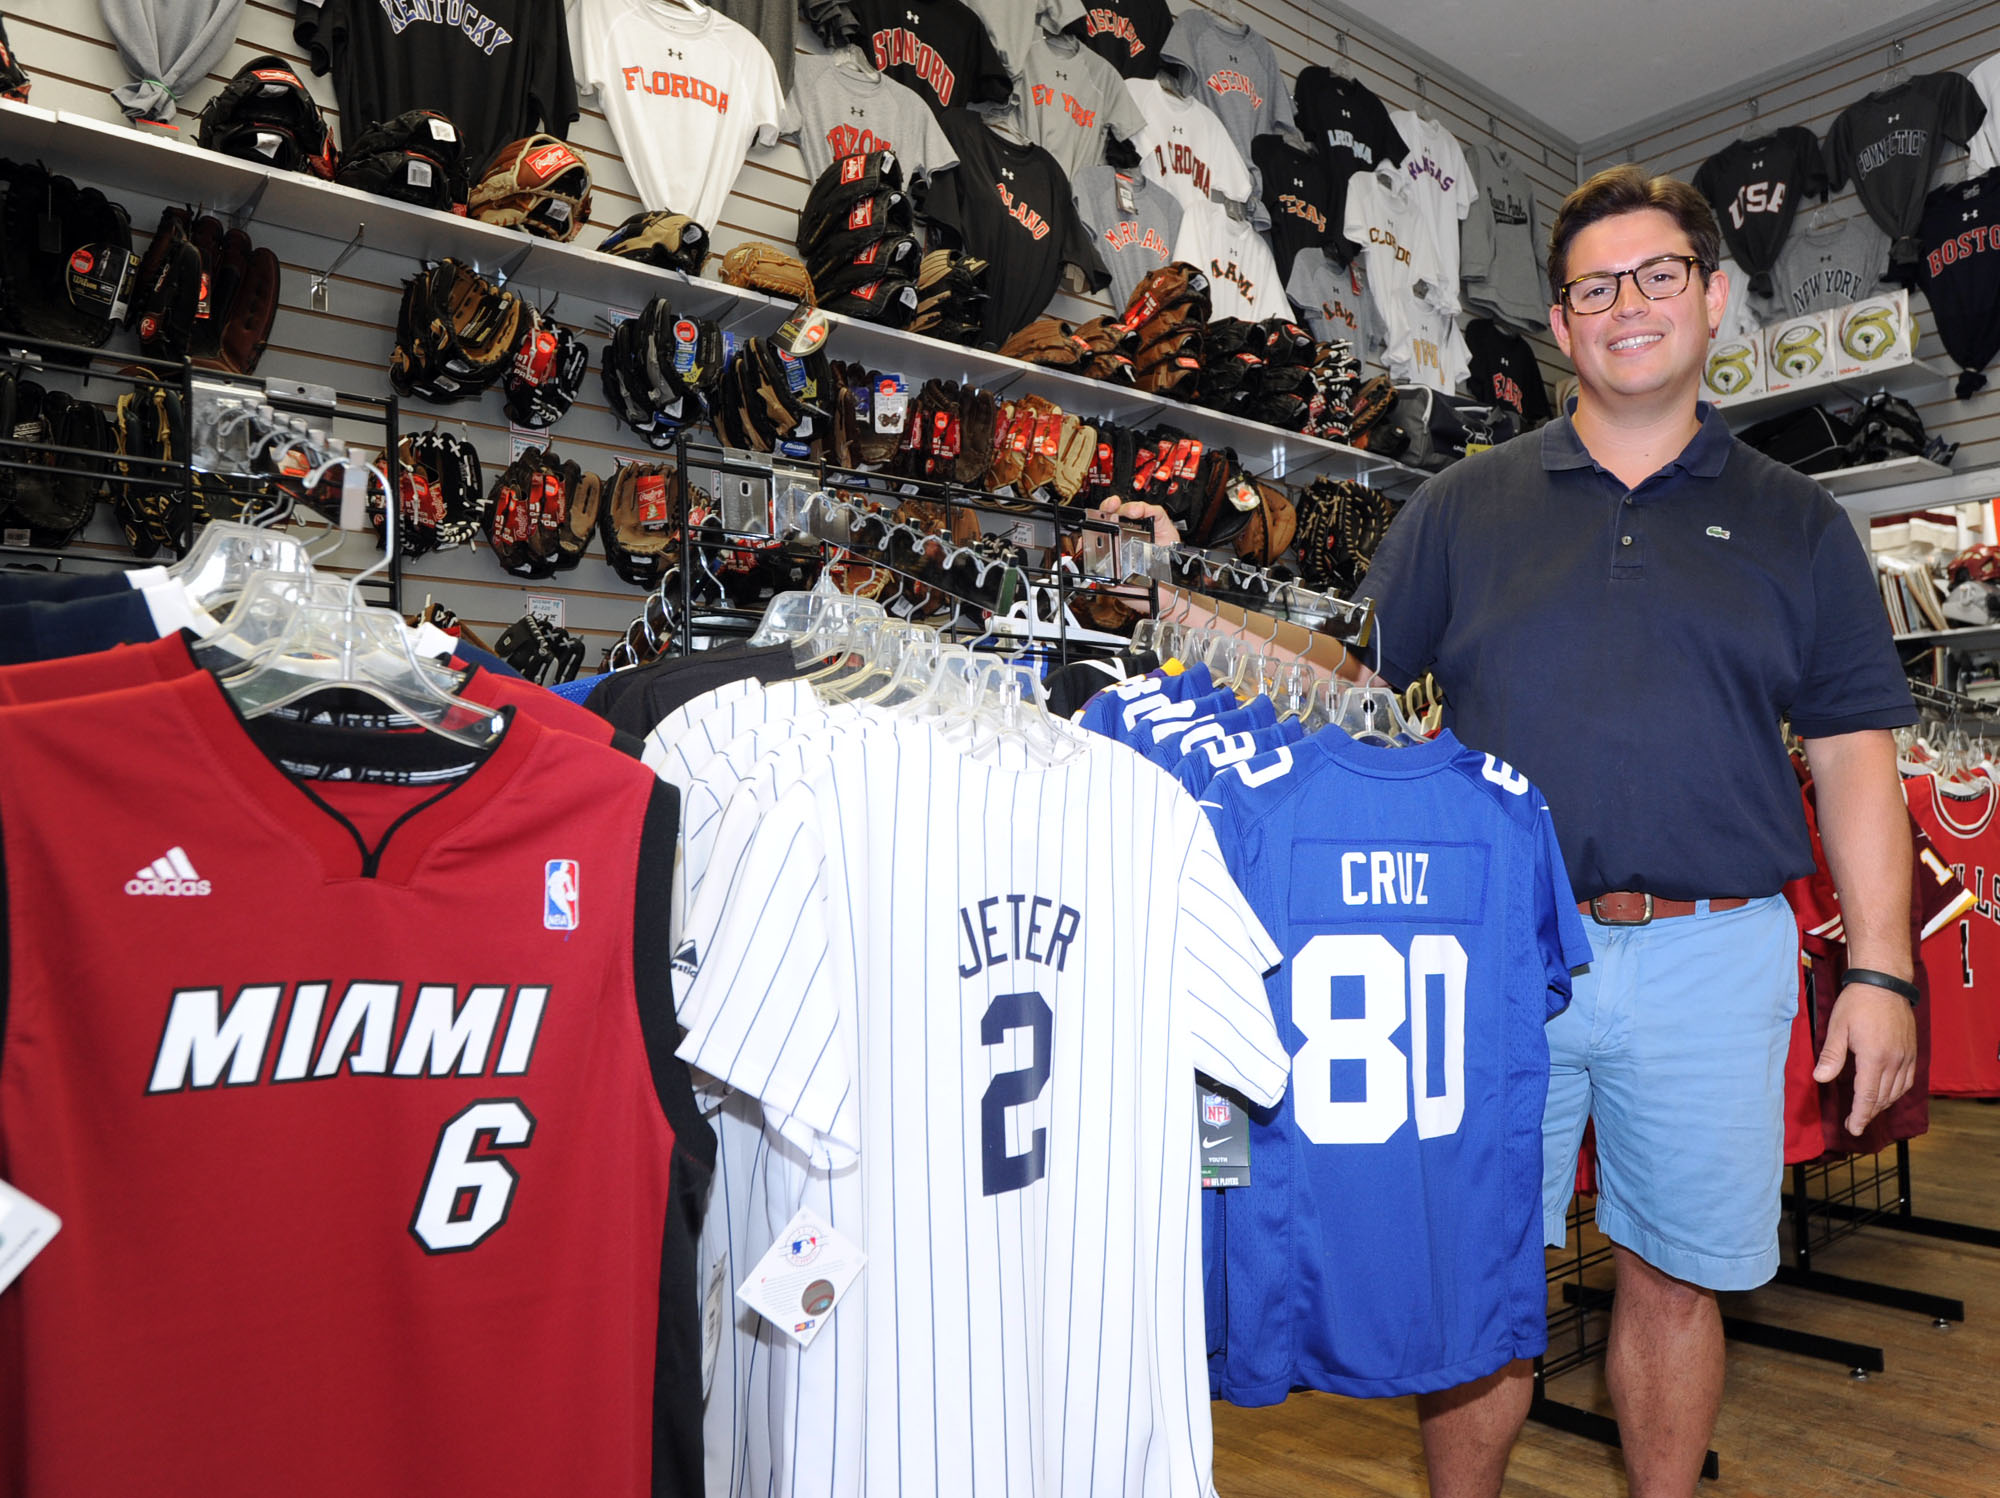 sports jersey stores